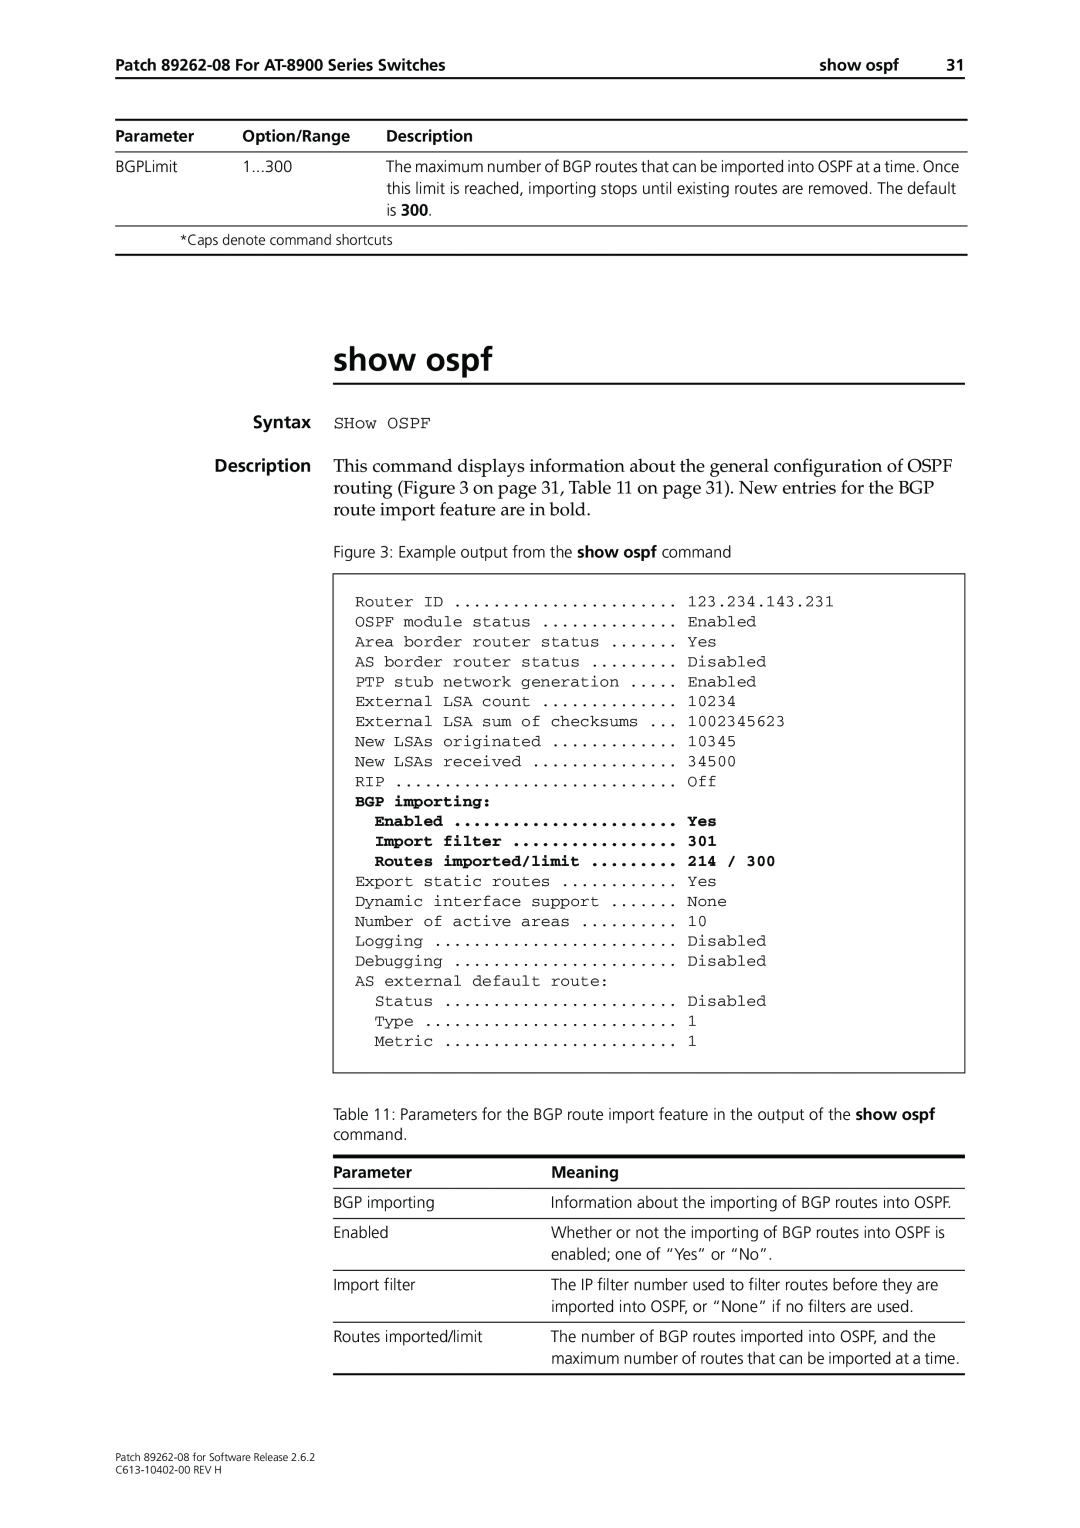 Allied Telesis manual show ospf, Syntax SHow OSPF, Patch 89262-08 For AT-8900 Series Switches, Parameter, Option/Range 